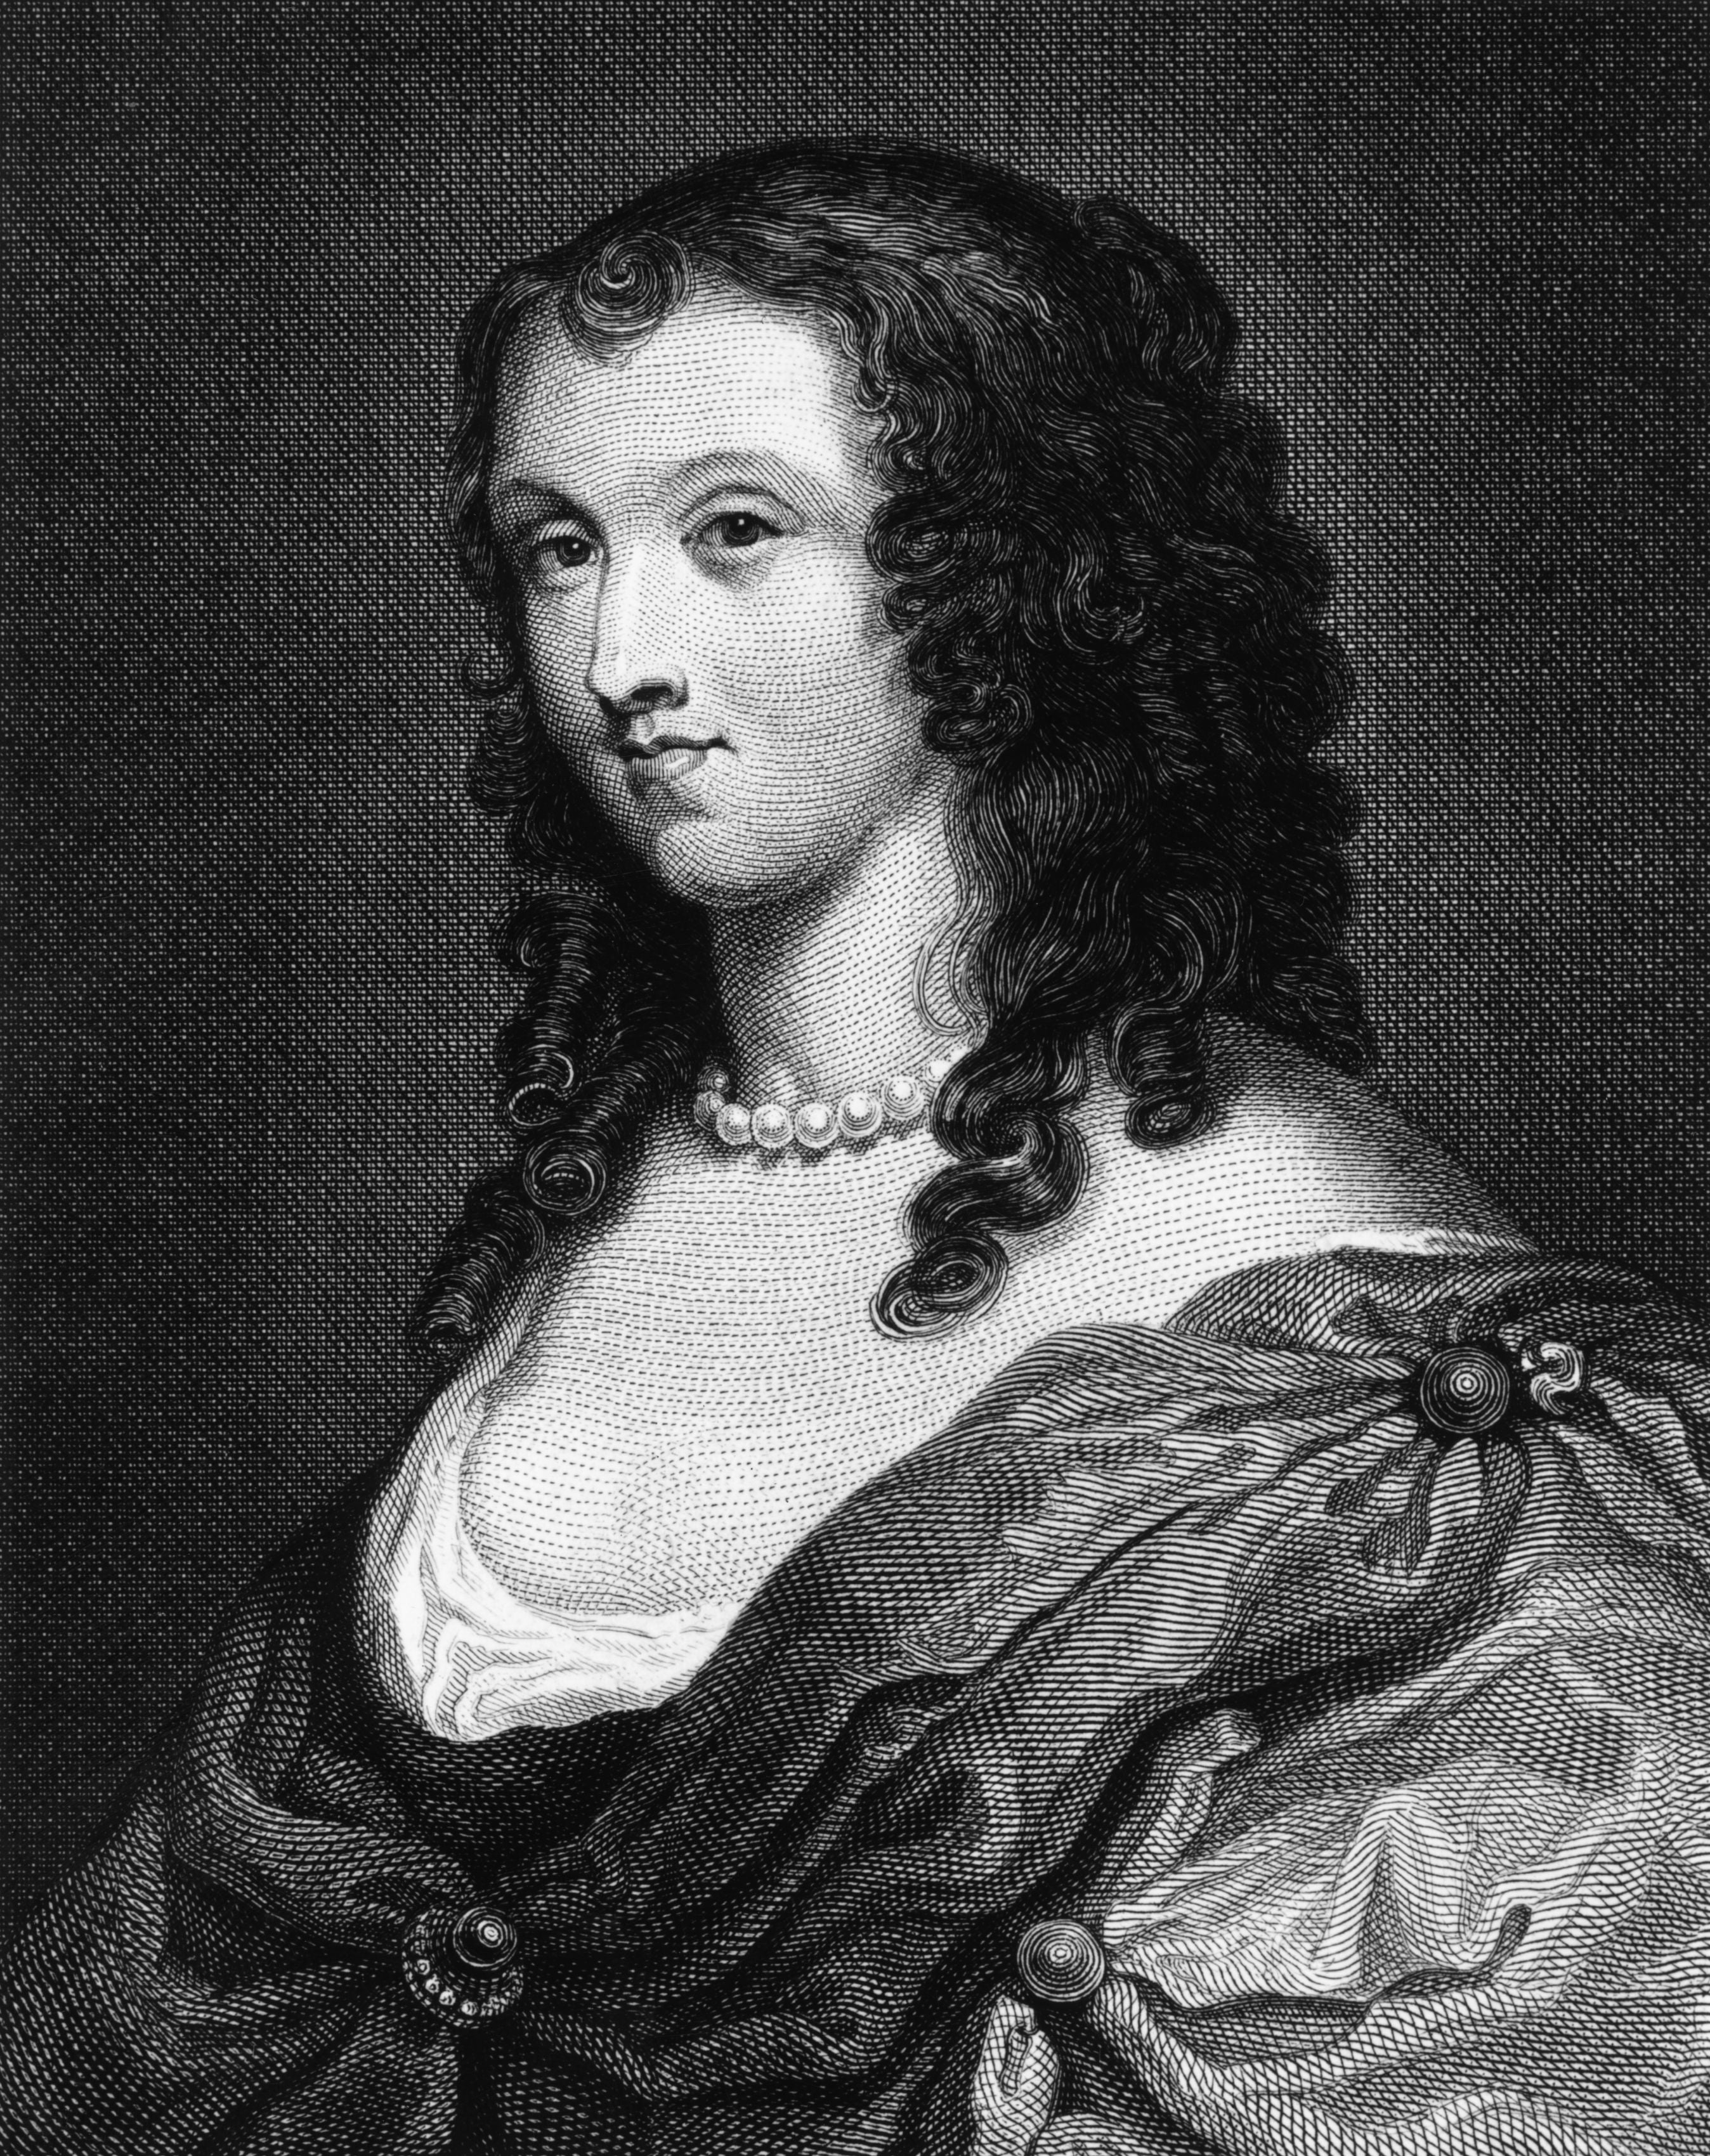 Aphra Behn worked as a spy trafficking political and naval information and later became England's first professional writer.